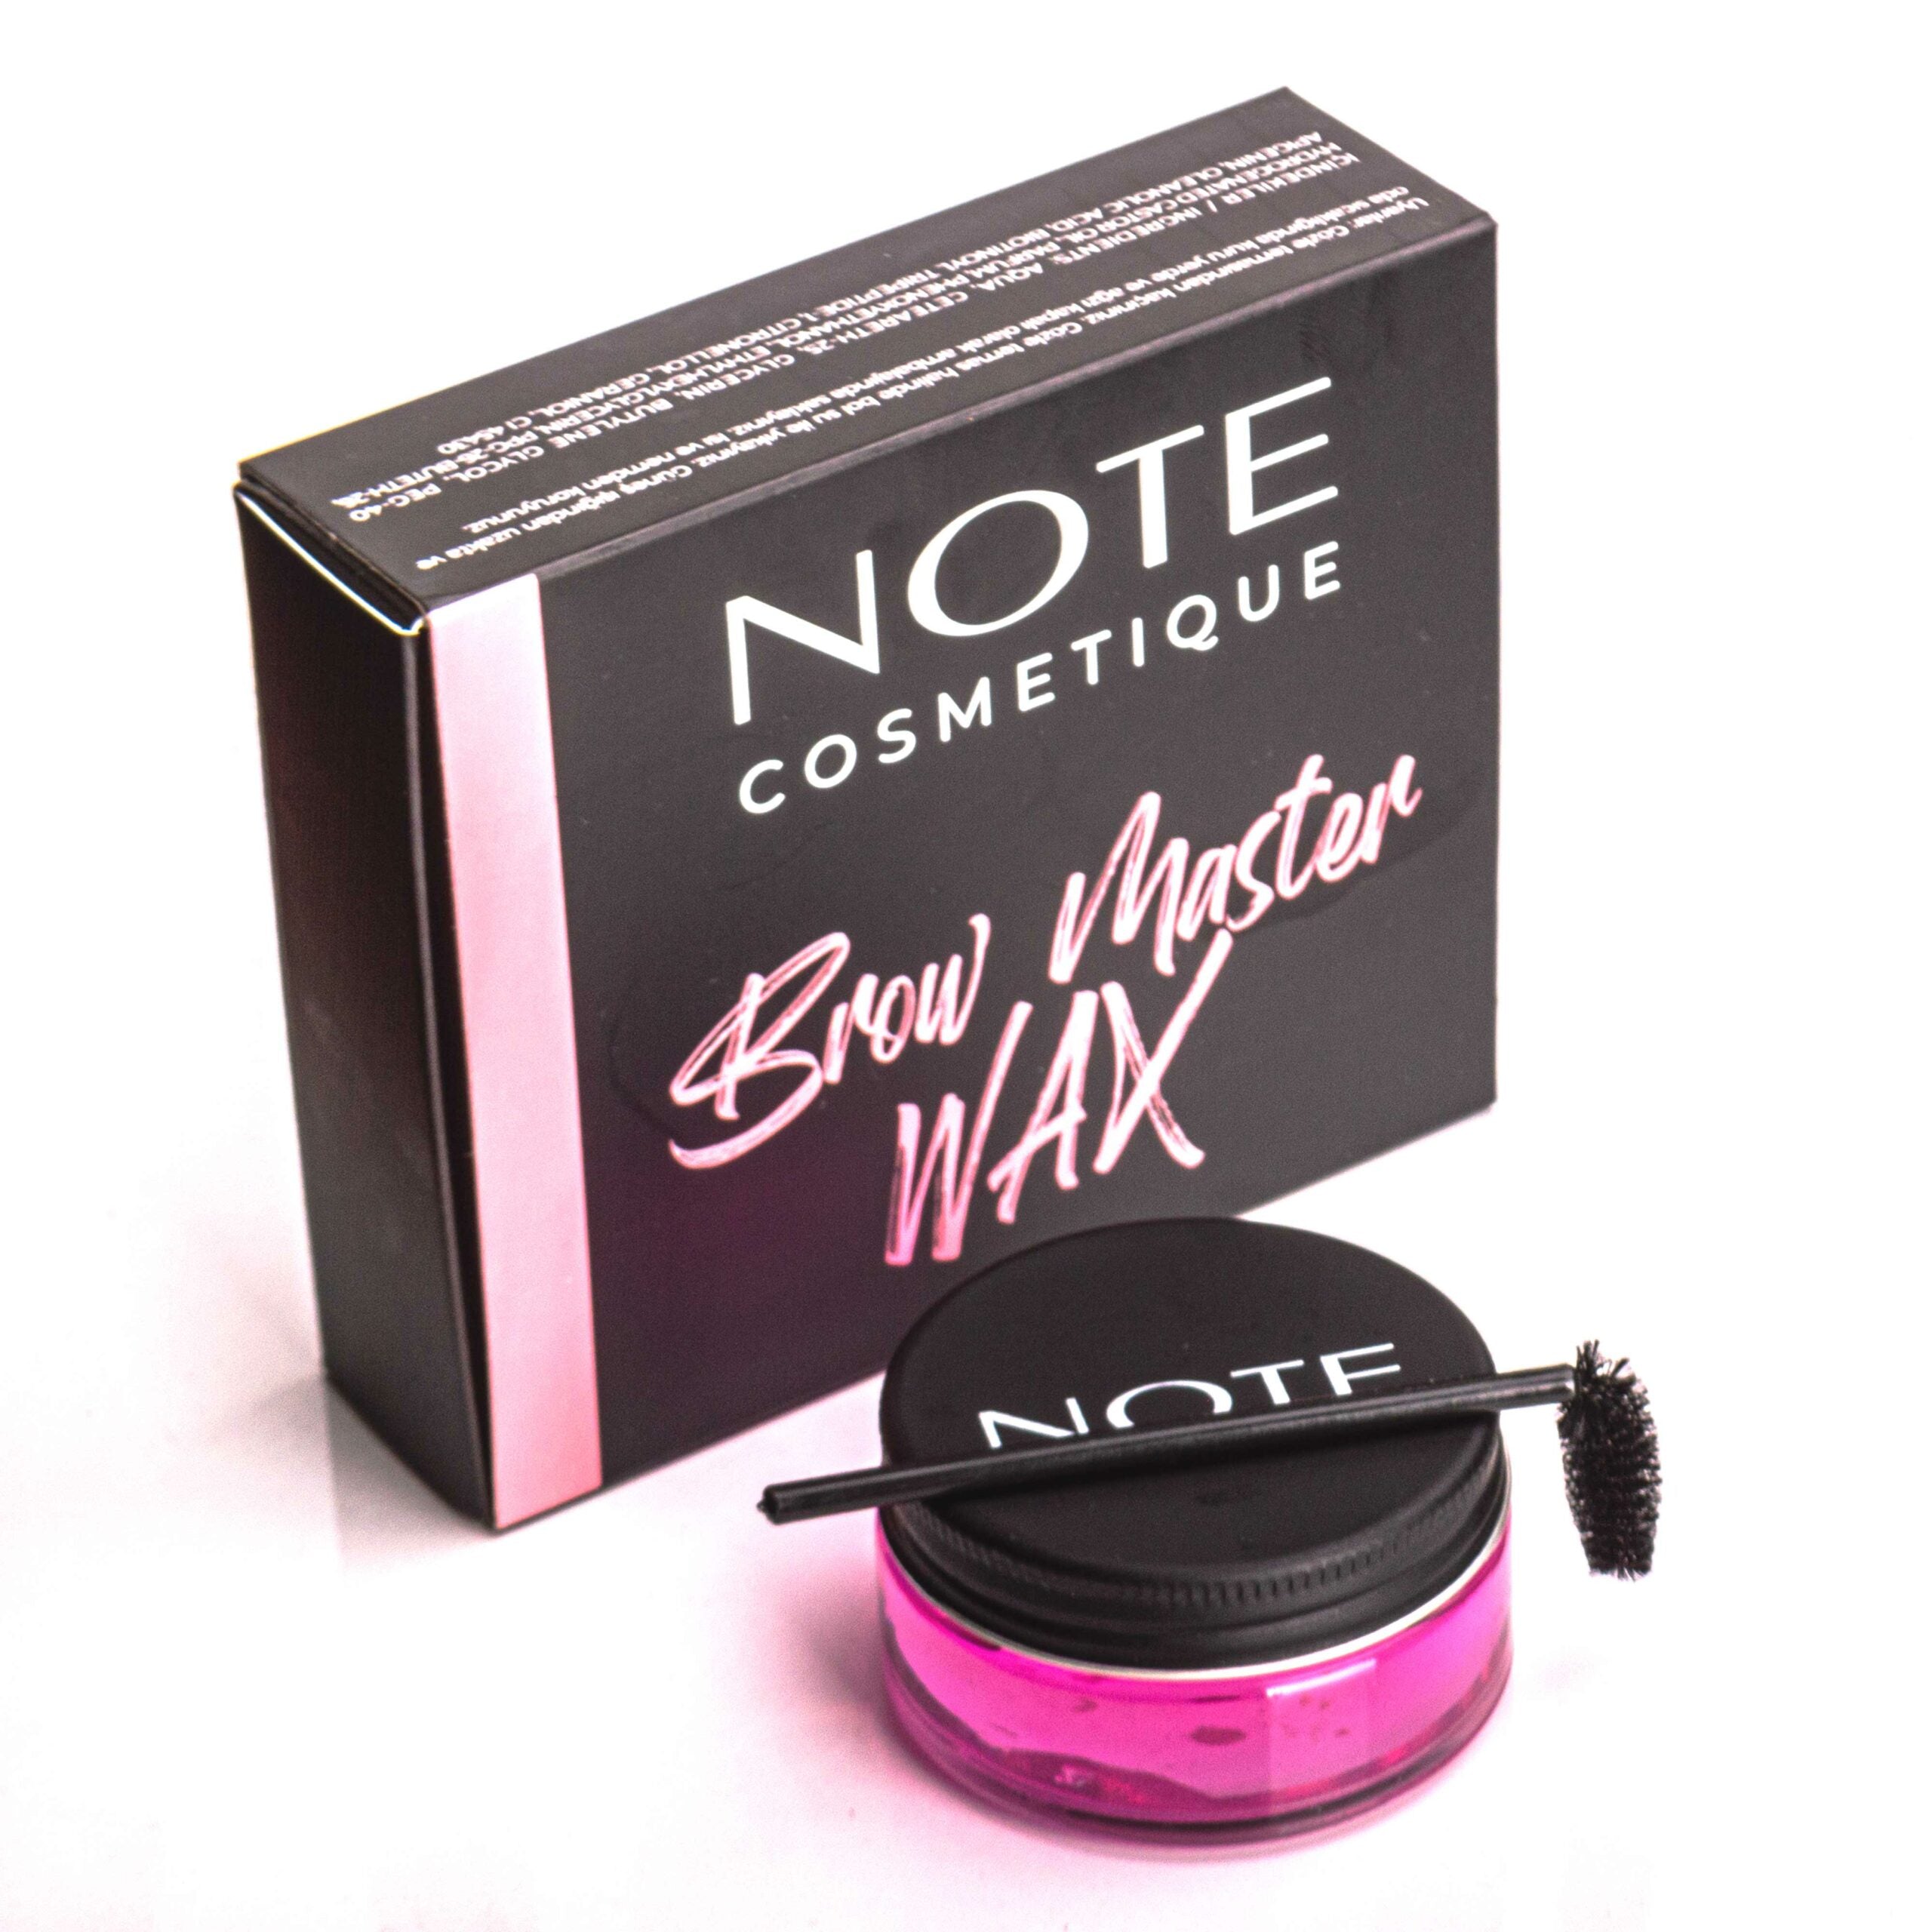 Note Brow Master Wax